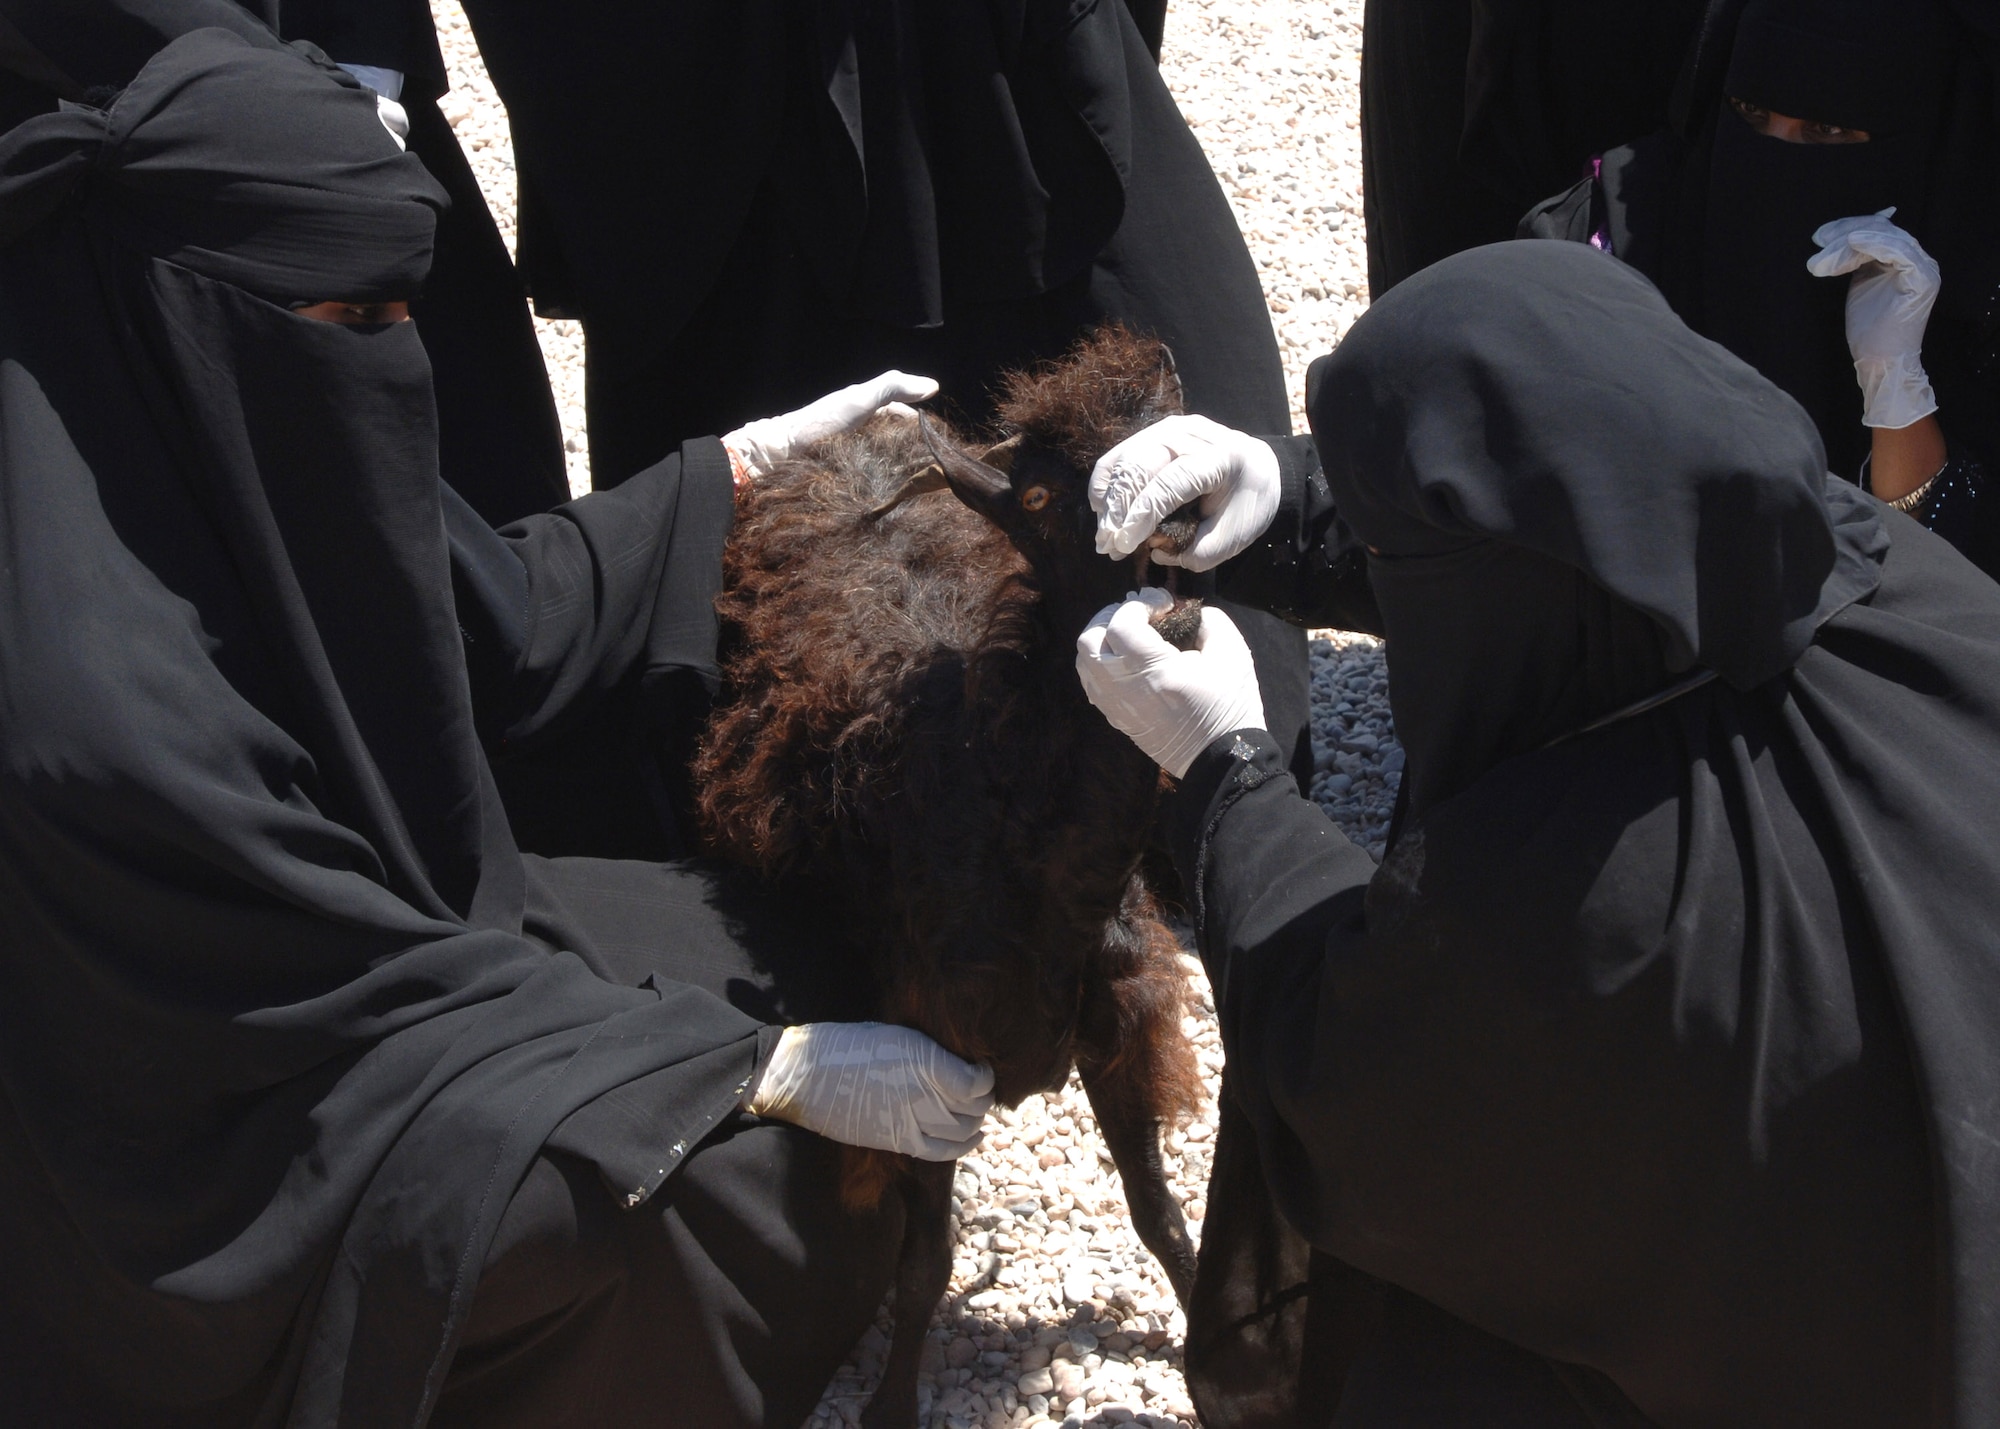 Yemen animal health workers examine a goat during training as part of a Combined Joint Task Force-Horn of Africa Veterinary Civic Action Project on the island of Socotra. The objective of the project was to teach women on the island basic animal husbandry techniques. (U.S. Air Force photo/Tech. Sgt. Carrie Bernard) 